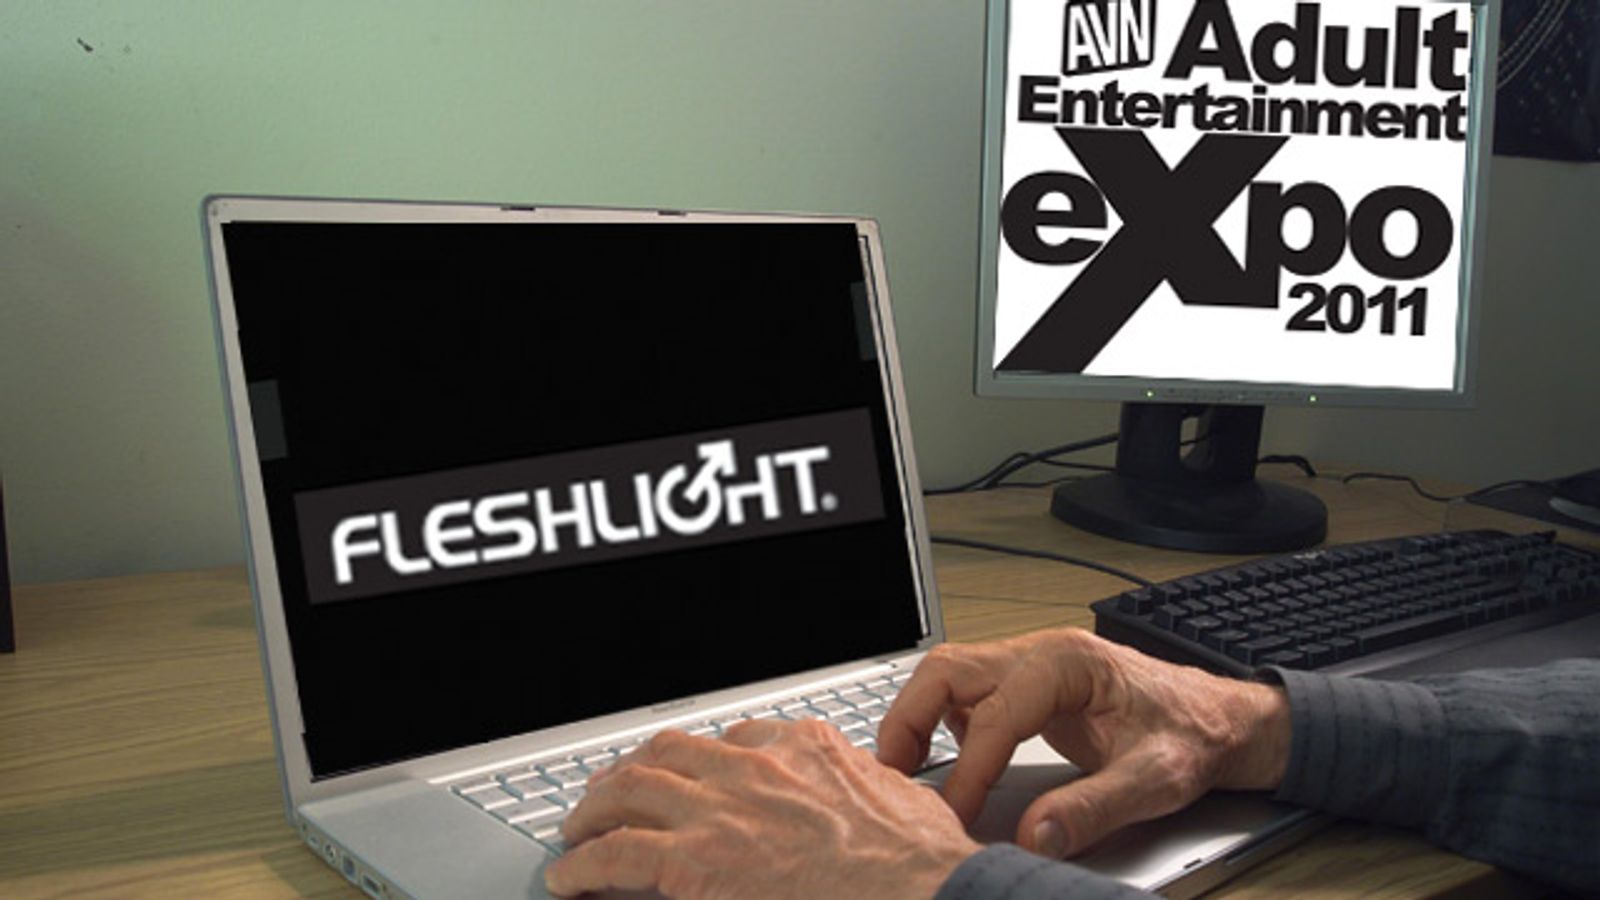 Fans Can Use Social Media to Get Into Fleshlight at AEE 2011